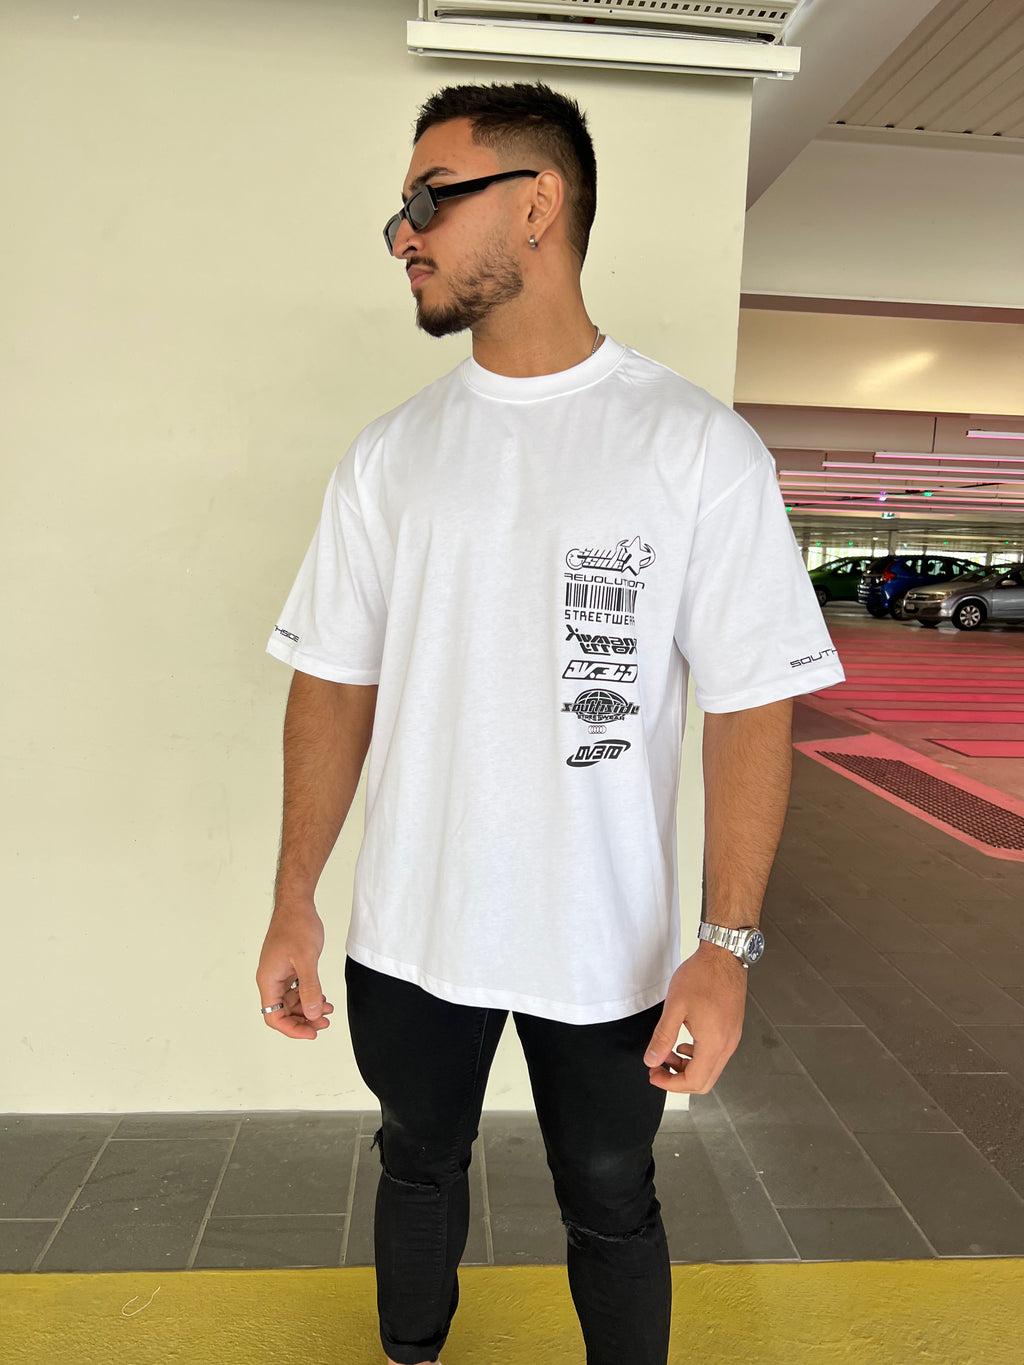 Southside - SMIL3Y Graphic – Southside Streetwear